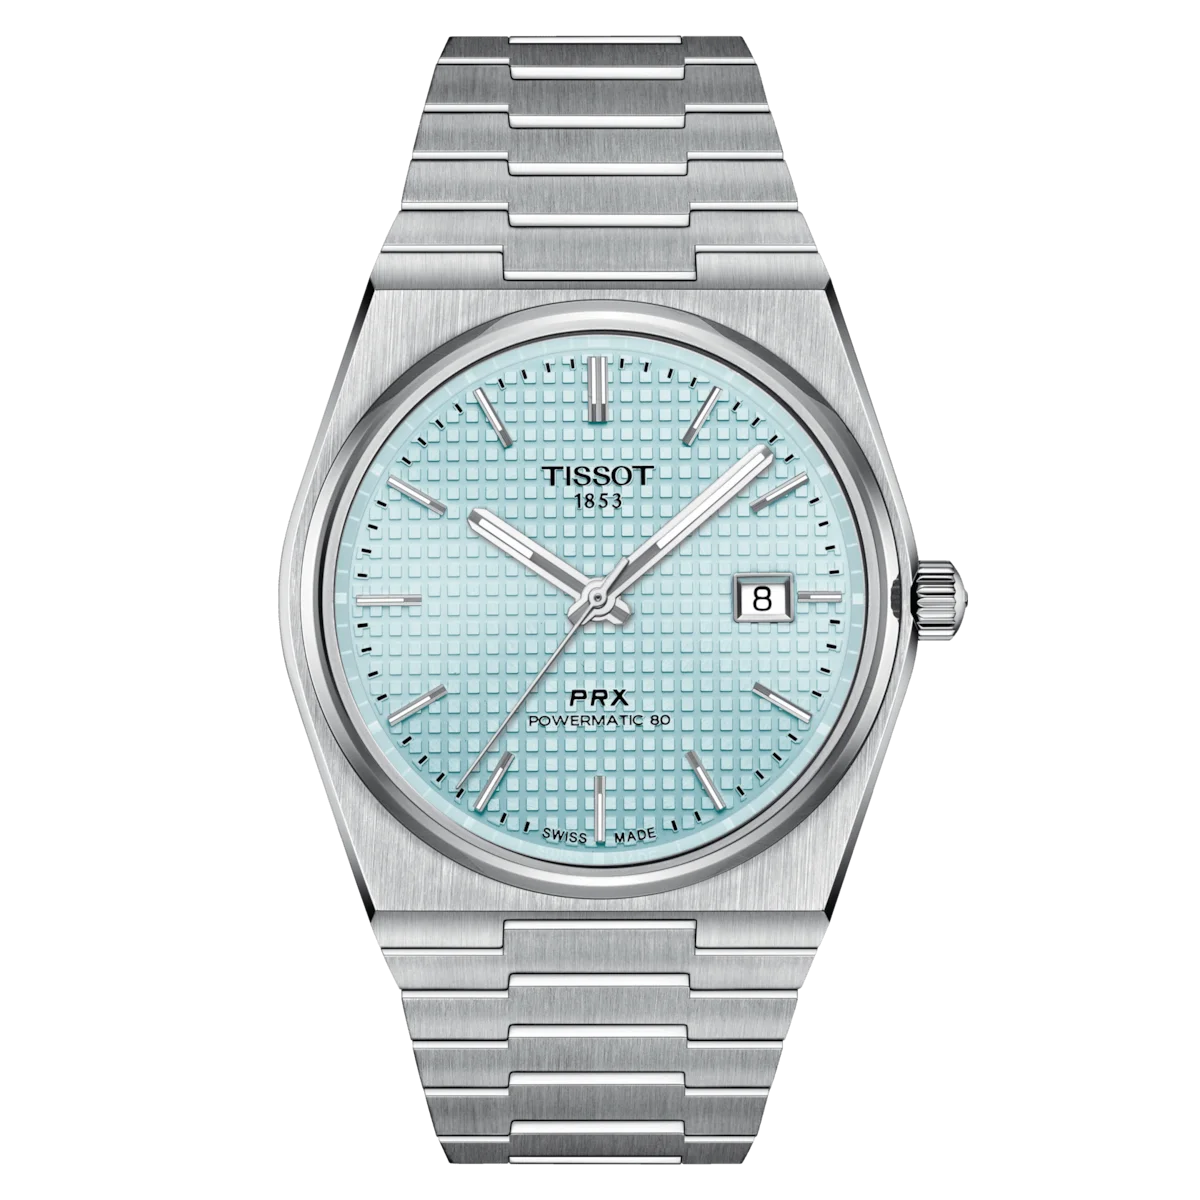 Tissot PRX 40mm Automatic Gents Swiss Timepiece ice Blue Stainless Steel Bracelet. T137.407.11.351.00 - Front Image.